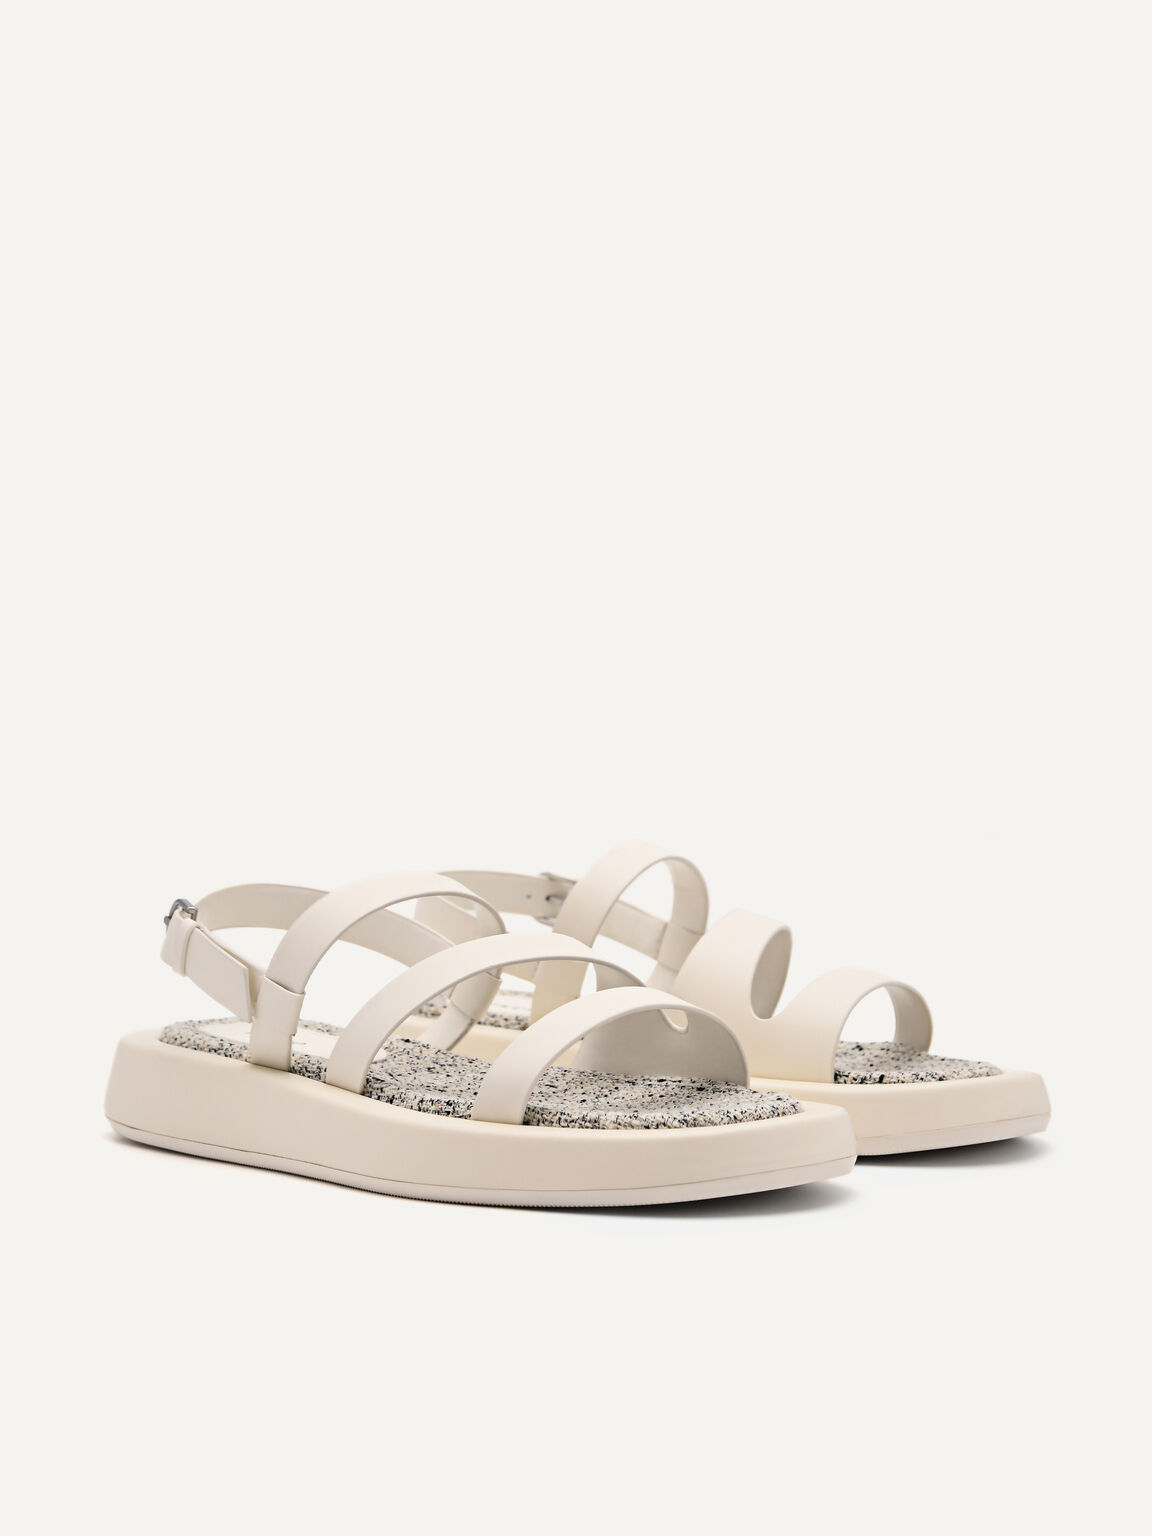 Cube Strappy Sandals, Chalk, hi-res